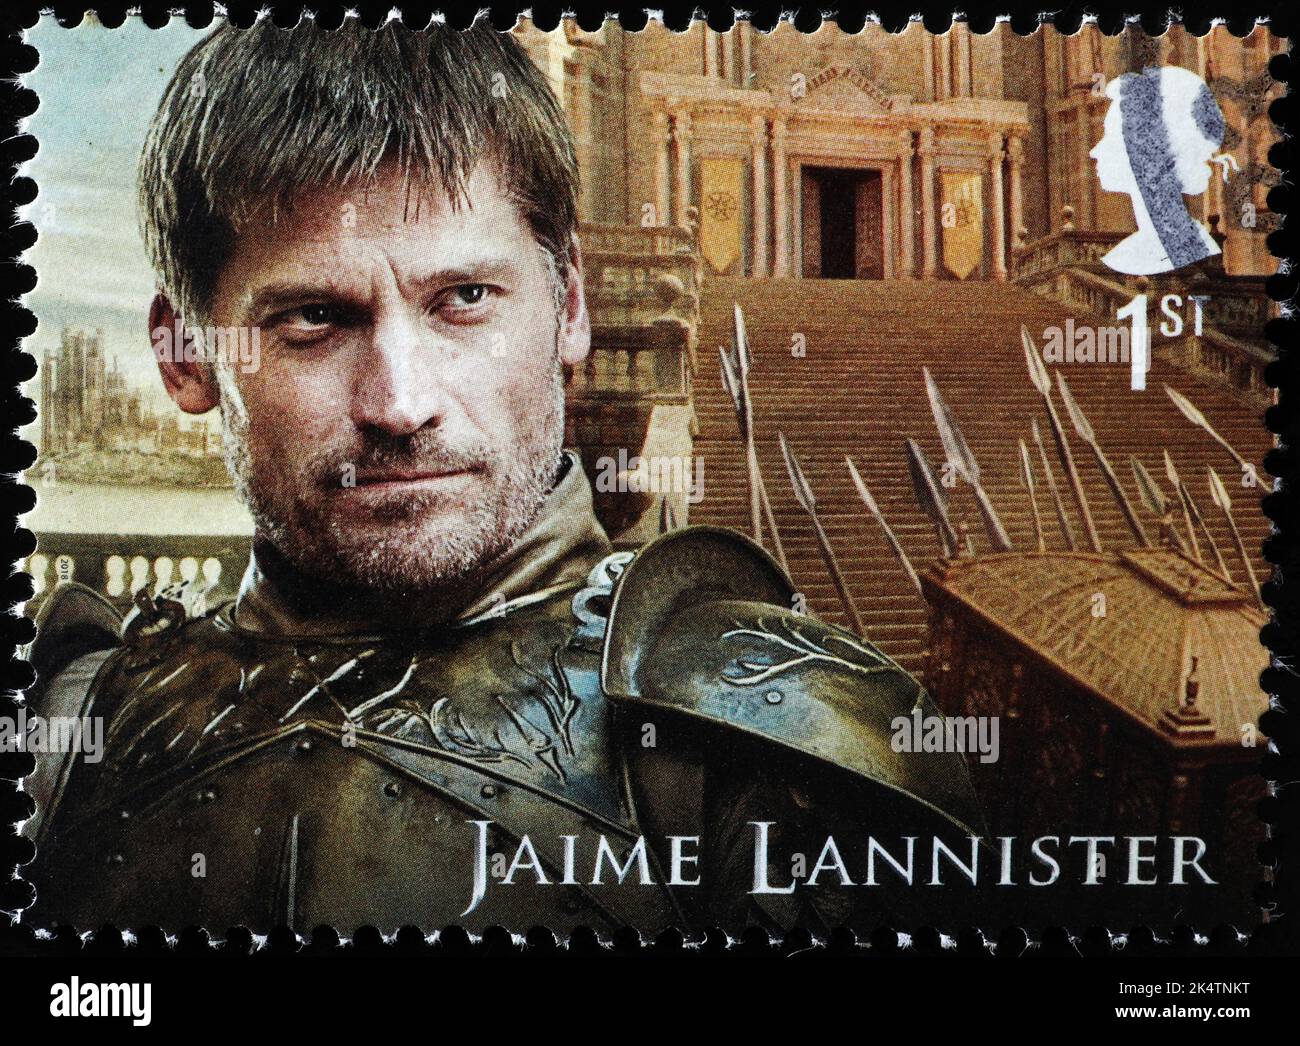 Character Jaime Lannister of Games of Thrones on stamp Stock Photo